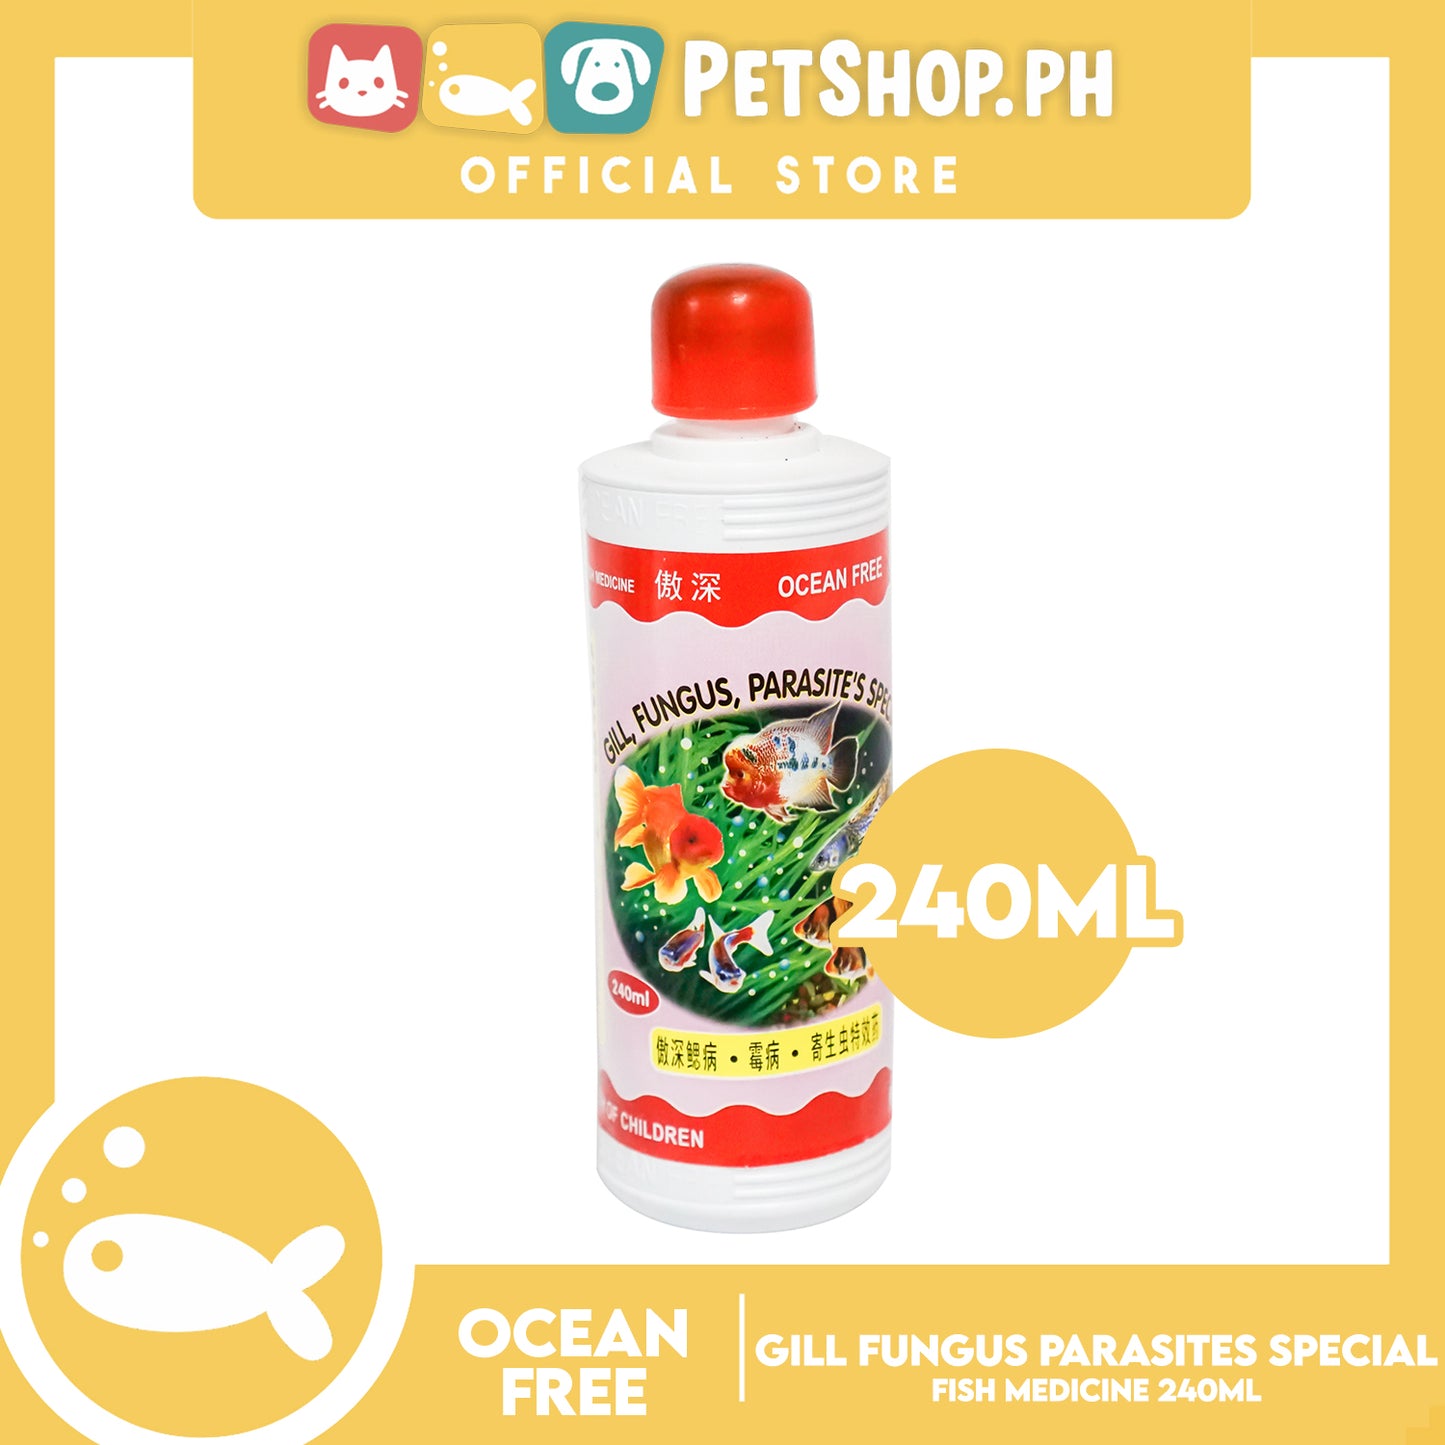 Ocean Free The Best Fish Medicine 240ml (Gill, Fungus, Parasite's Special)